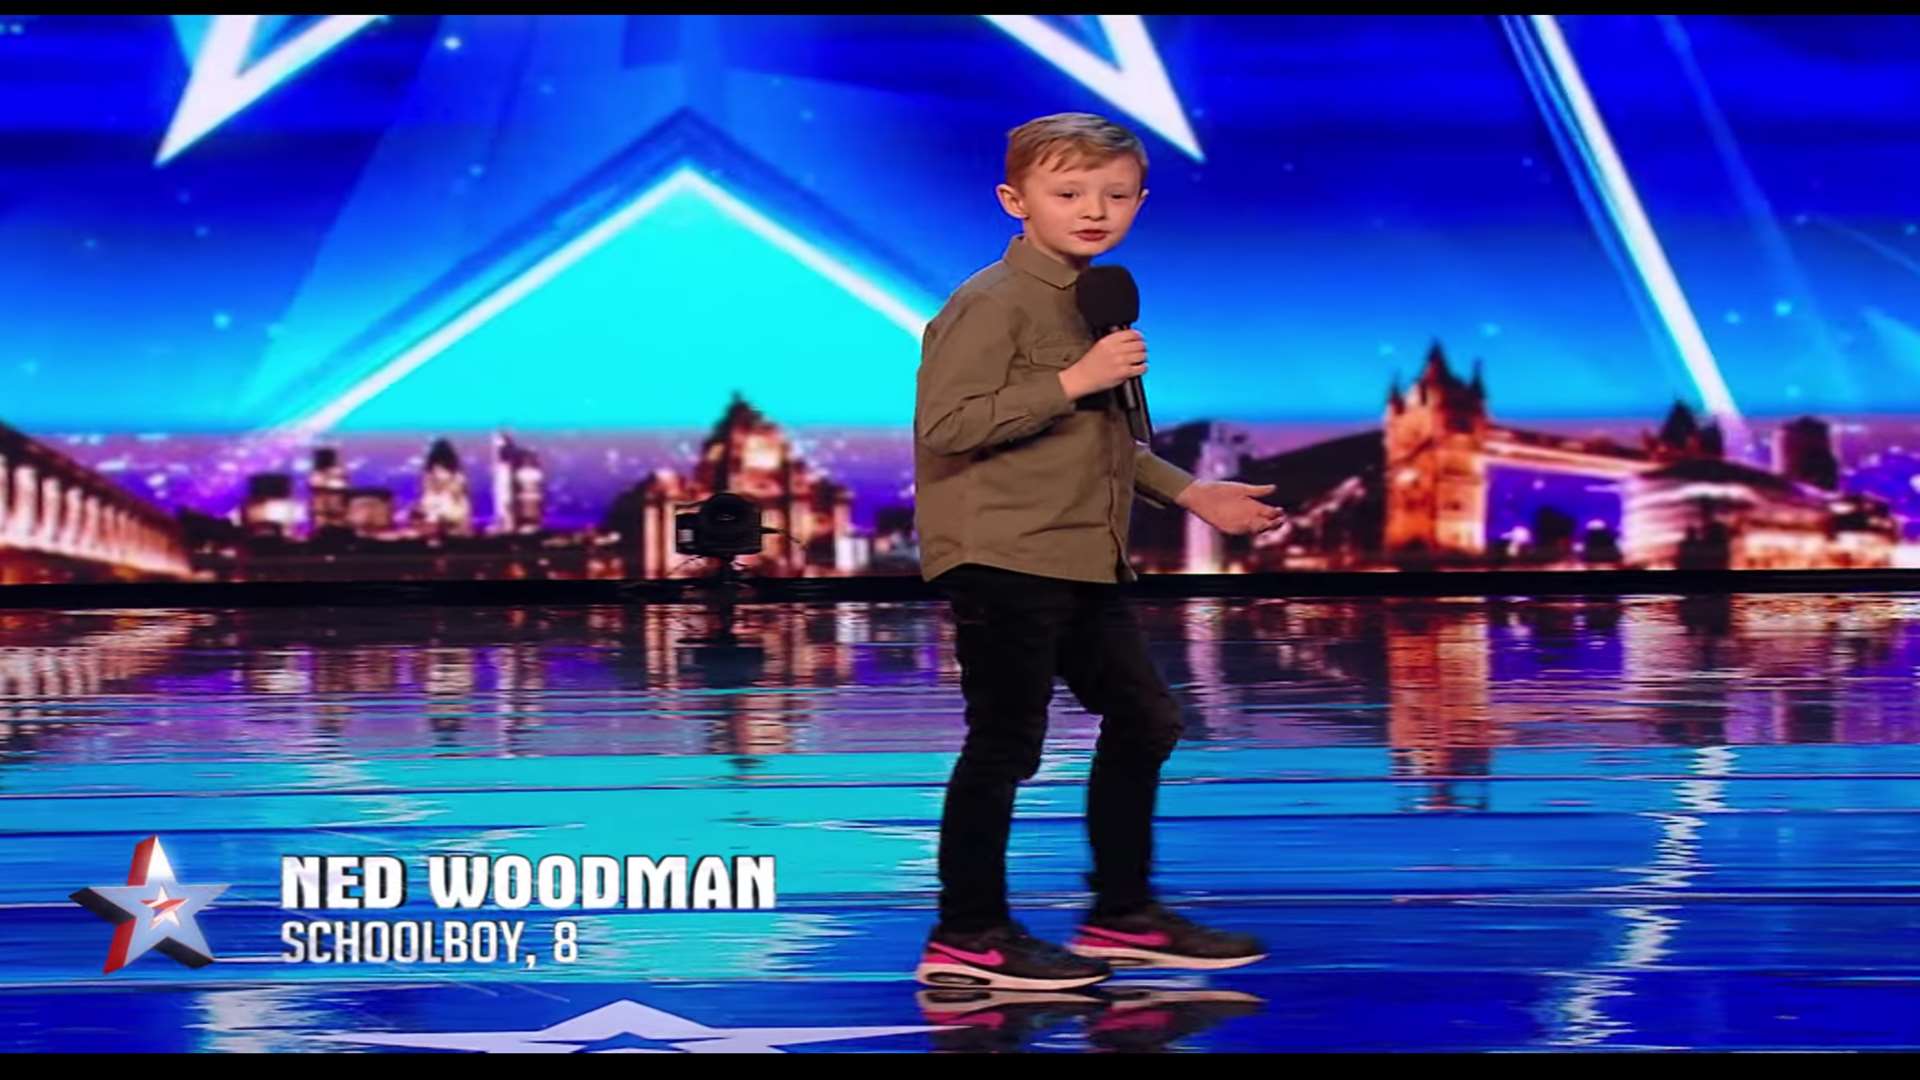 Ned Woodman. Picture: ITV via YouTube